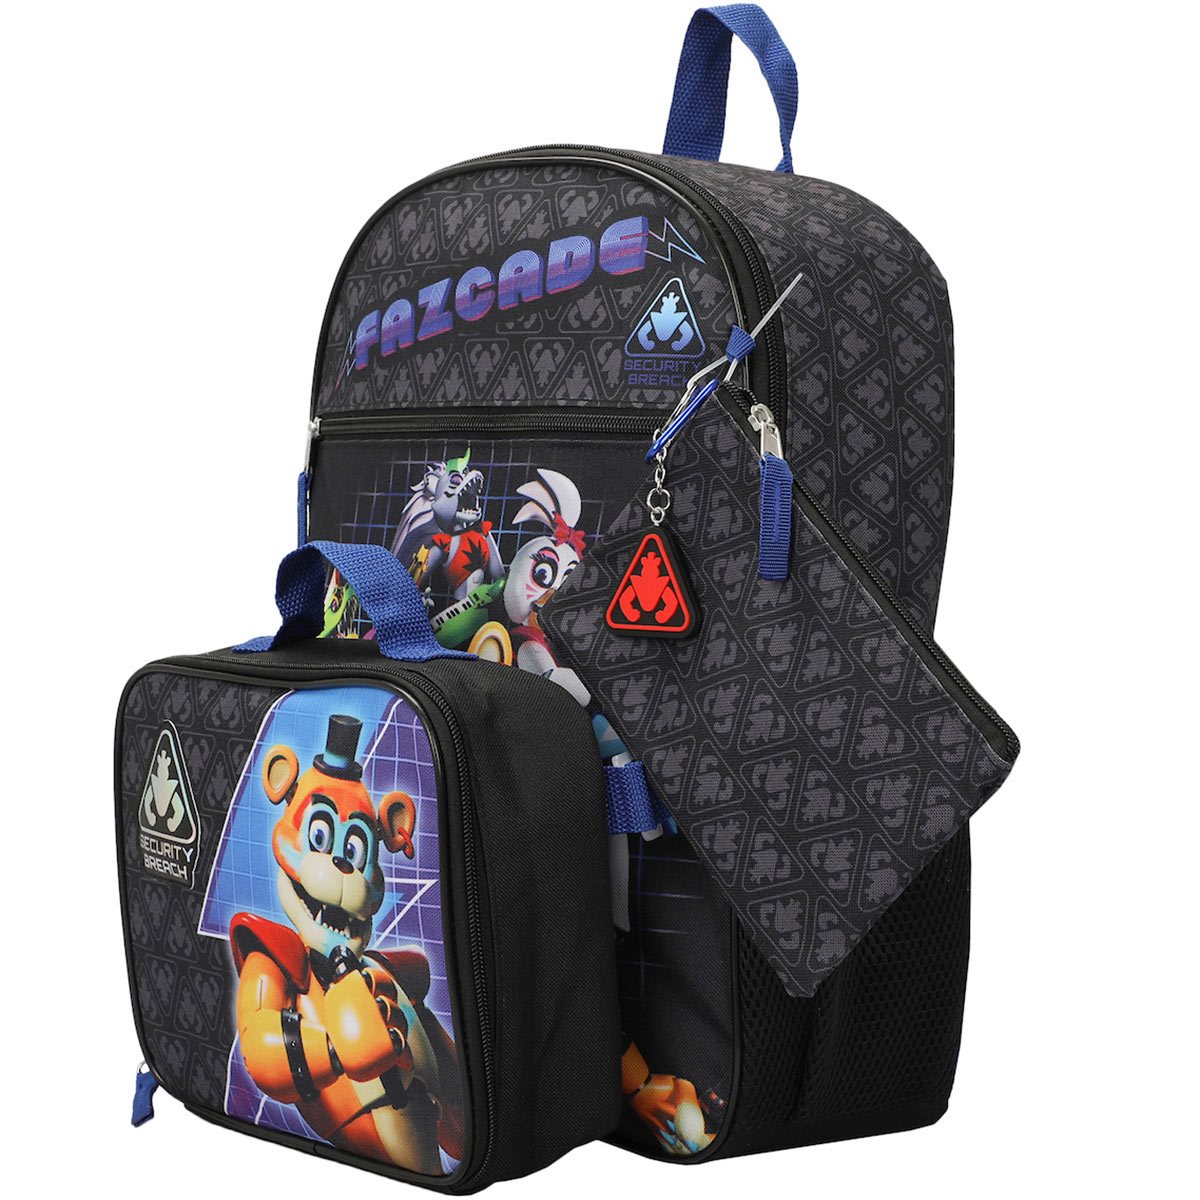 Five Nights at Freddy's Backpack Black